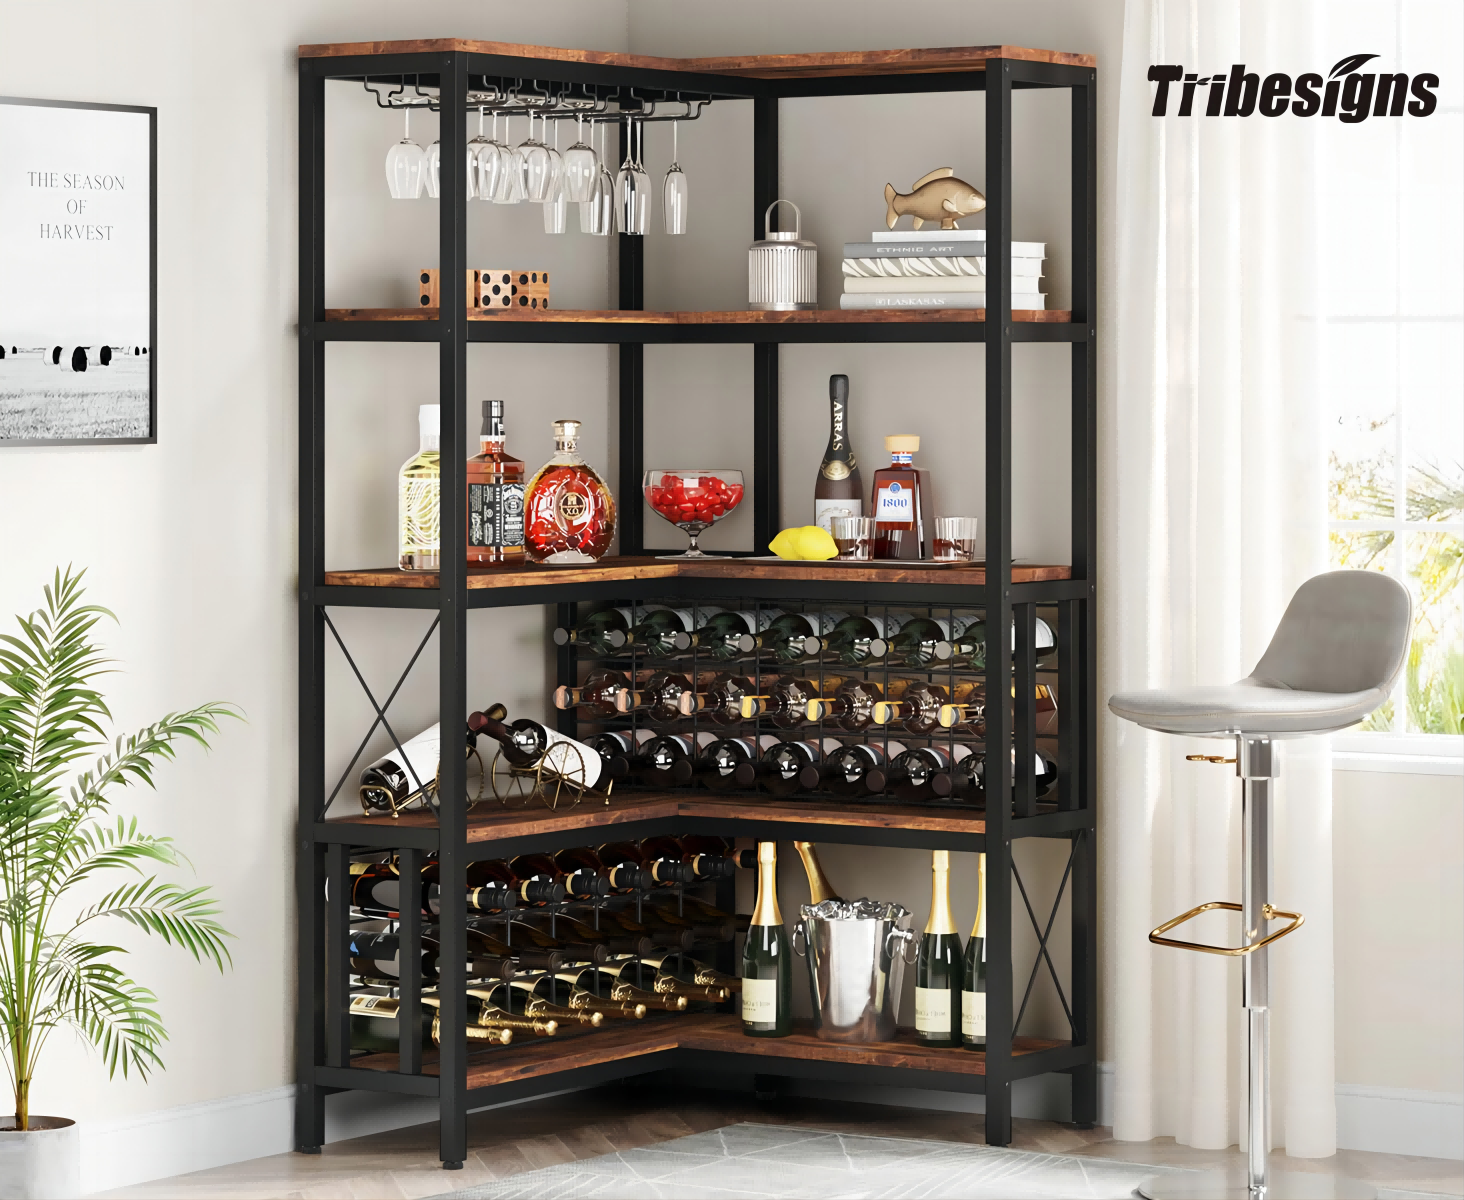 Tribesigns L-Shaped Home Bar Unit, 3 Tier Liquor Bar Table with Storage  Shelves and 6 Wine Glasses Holder, Industrial Corner Wine Bar Cabinet Mini  Bars for Home Kitchen Pub, Rustic Brown 